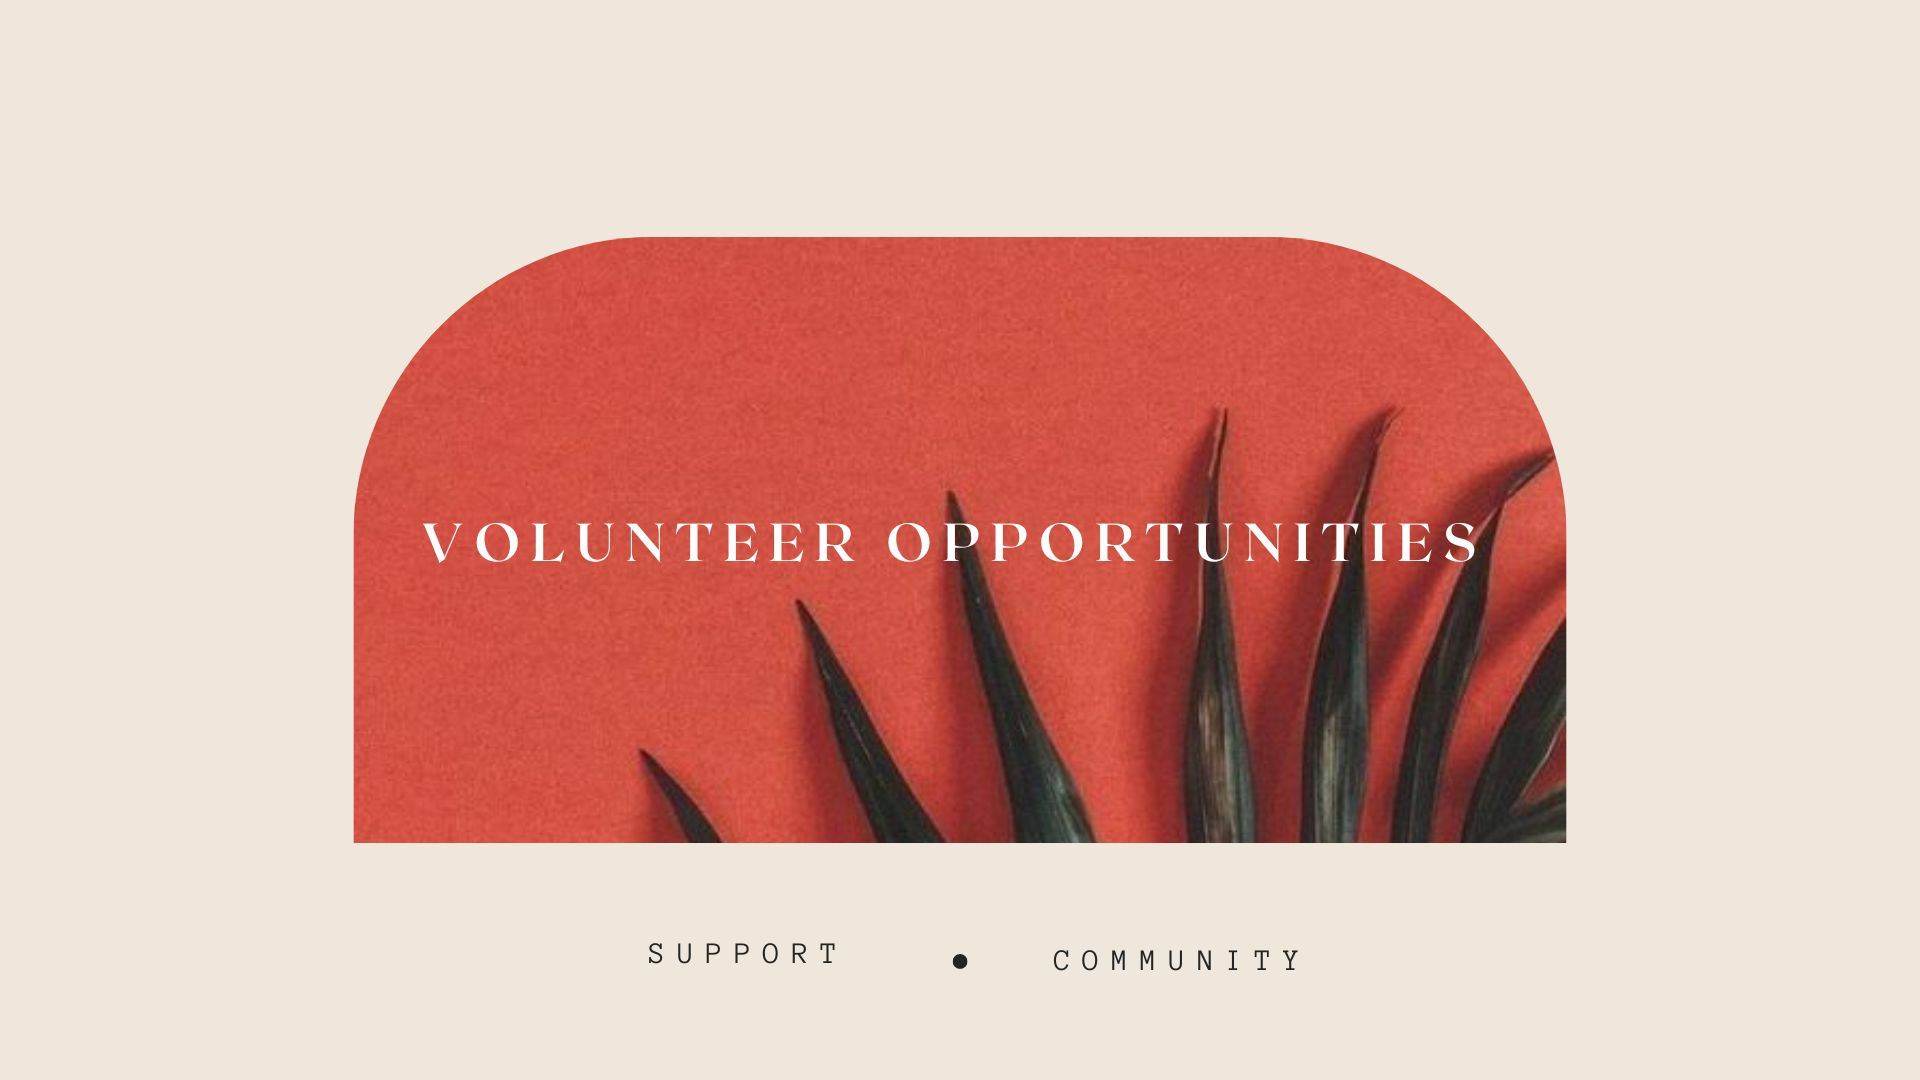 Volunteer opportunities.  Support. community.  Image of plants against orange wall.